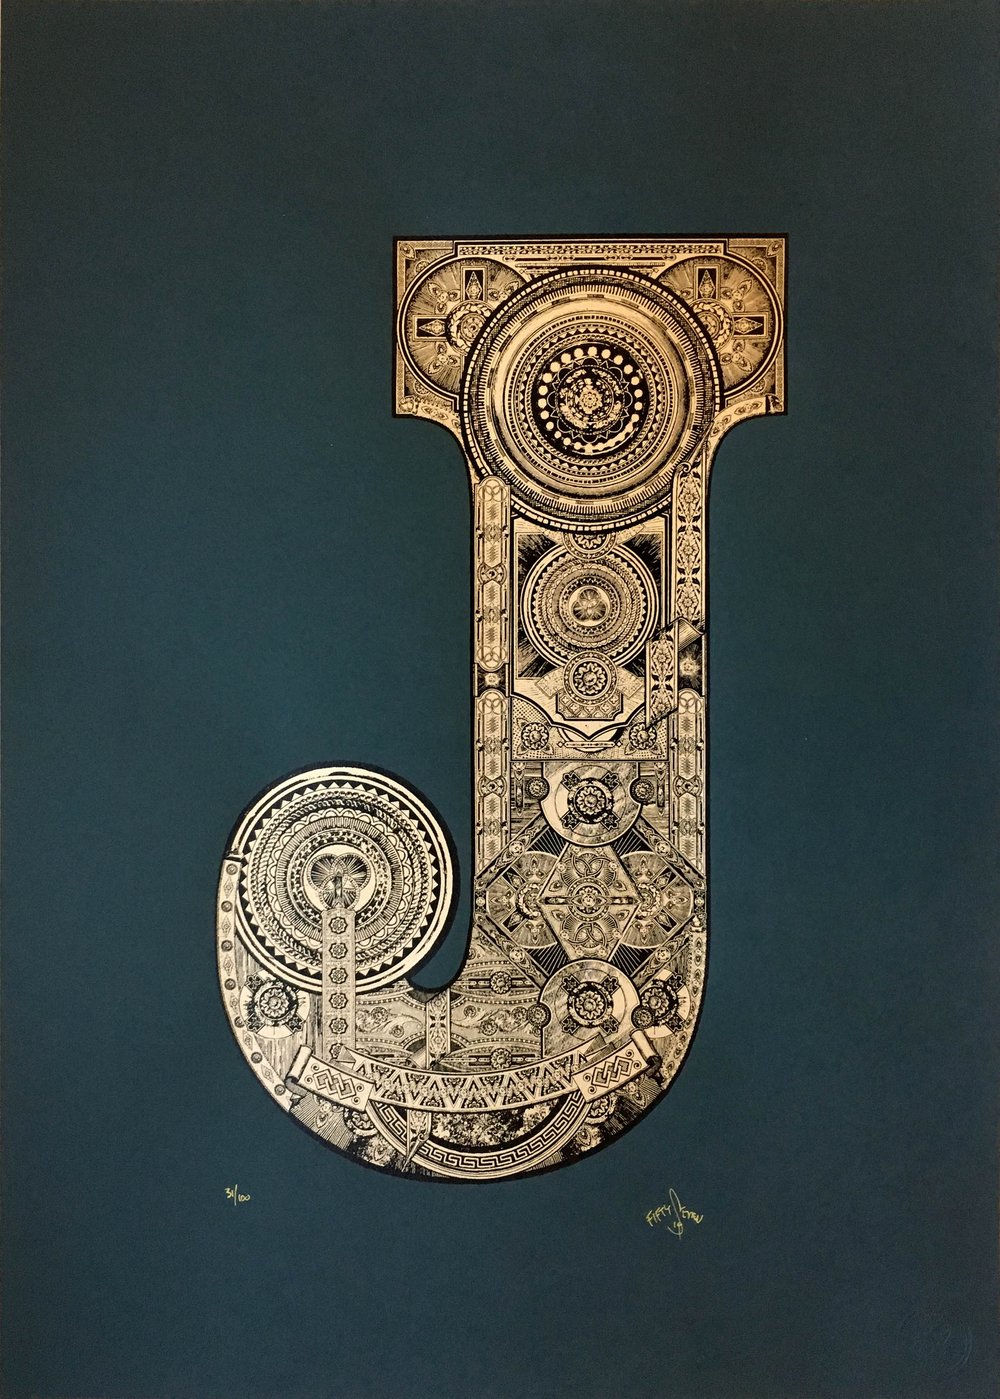 The Illustrated Letter Project: 'J'